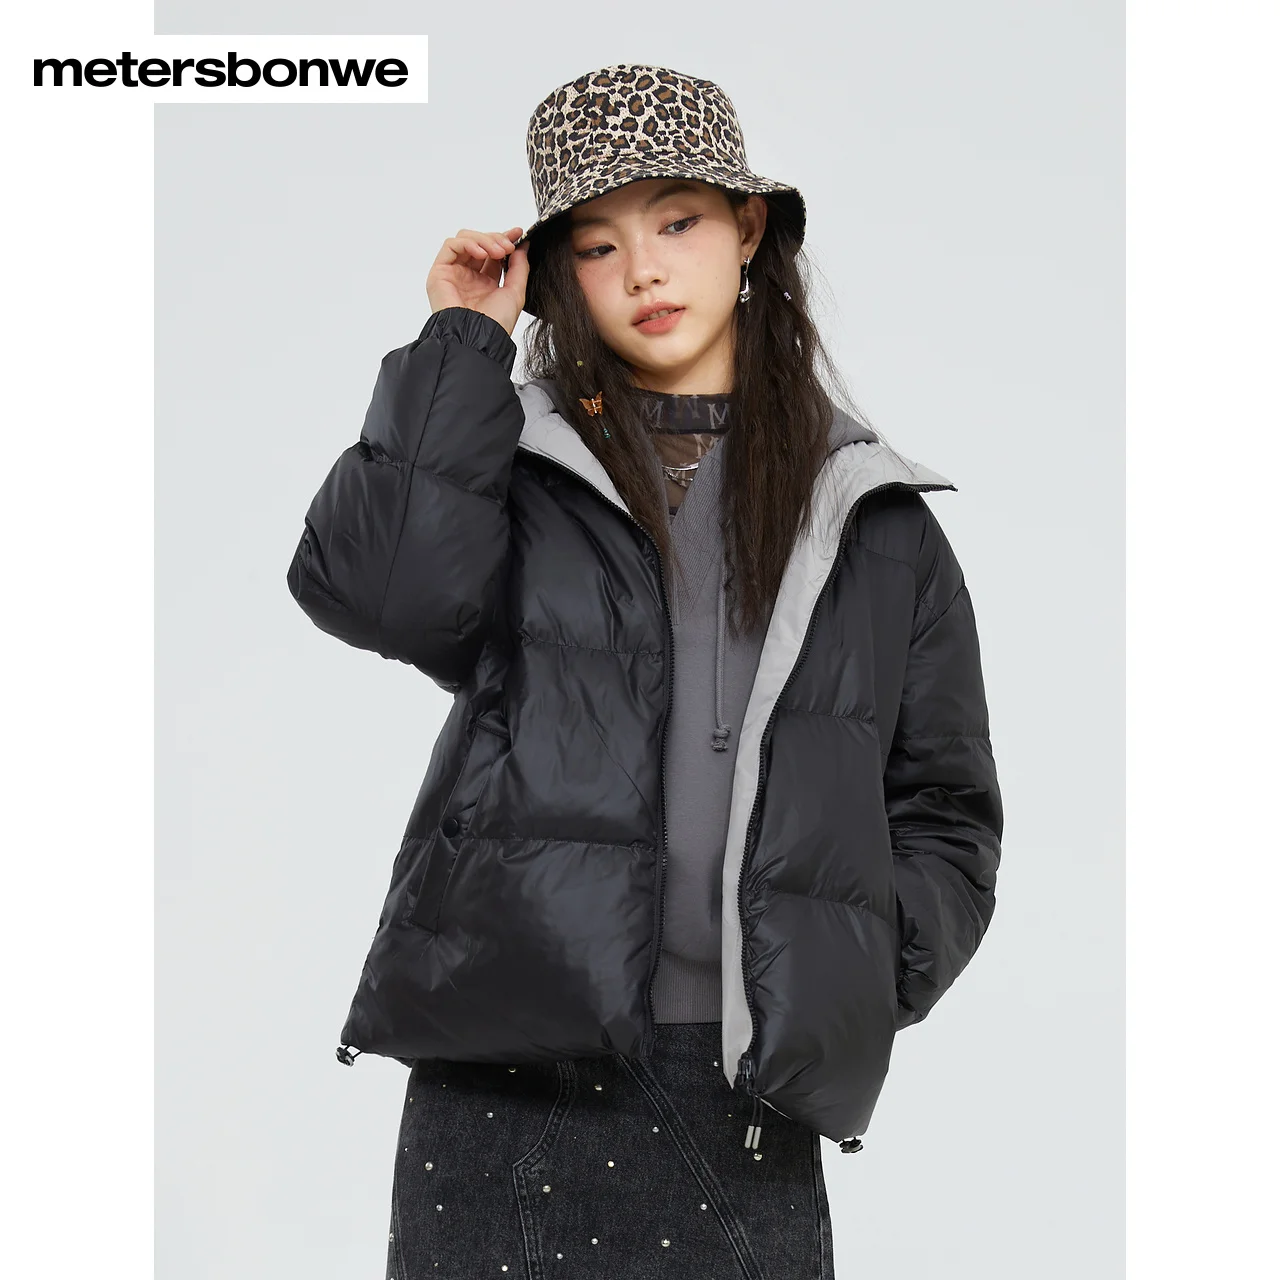 Metersbonwe Women's Stand Collar Short Down Jackets 80%Light And Soft Duck Down Warm Wear Loose Solid Color Winter Down Coat